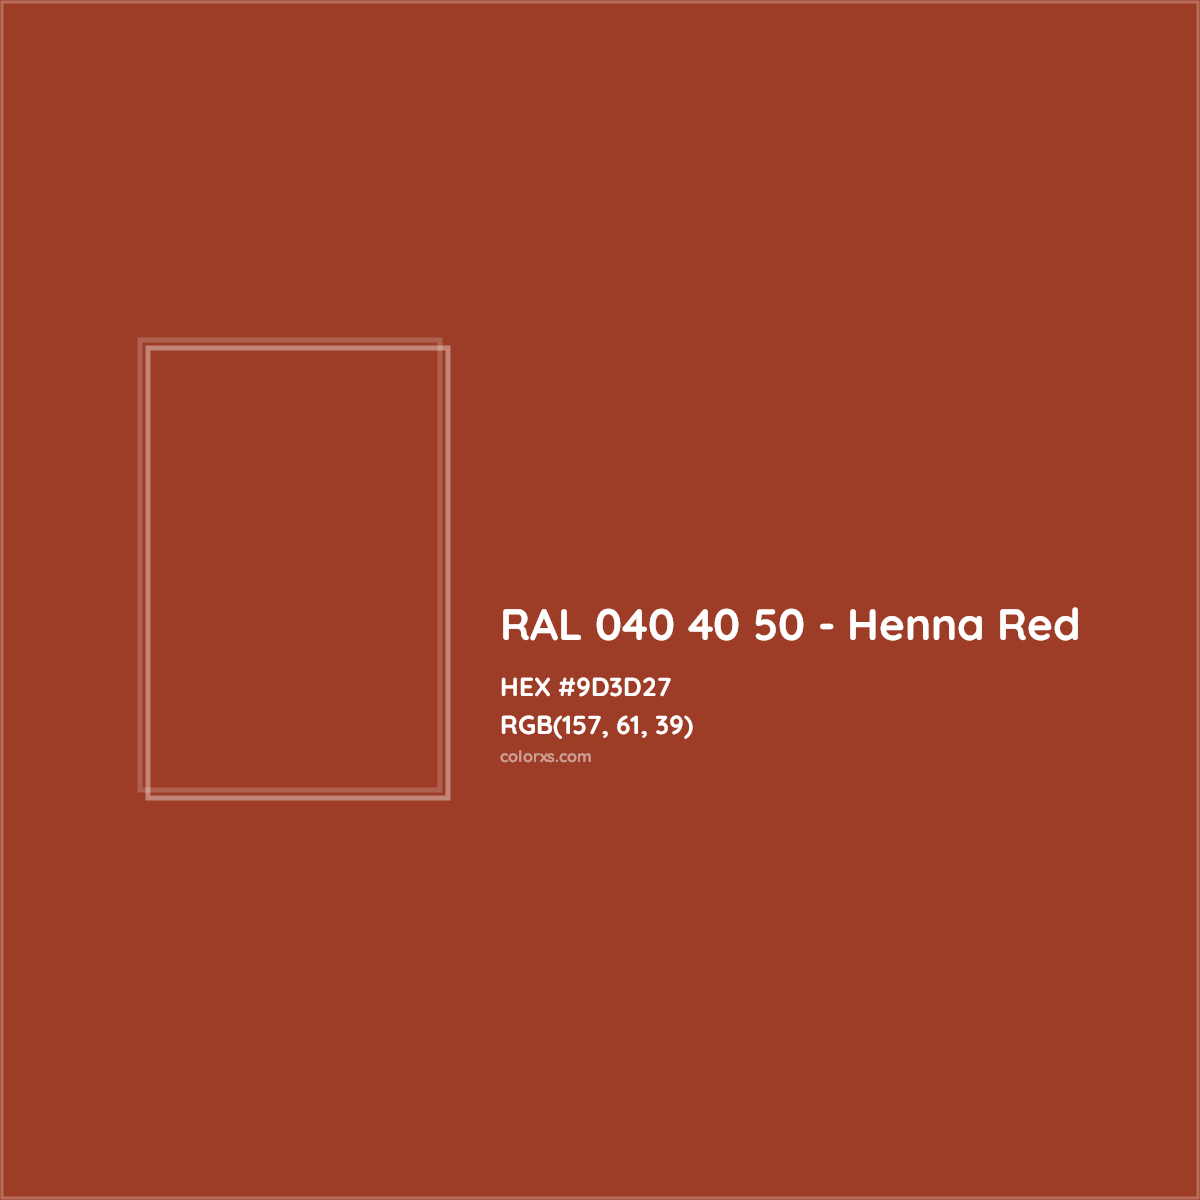 HEX #9D3D27 RAL 040 40 50 - Henna Red CMS RAL Design - Color Code